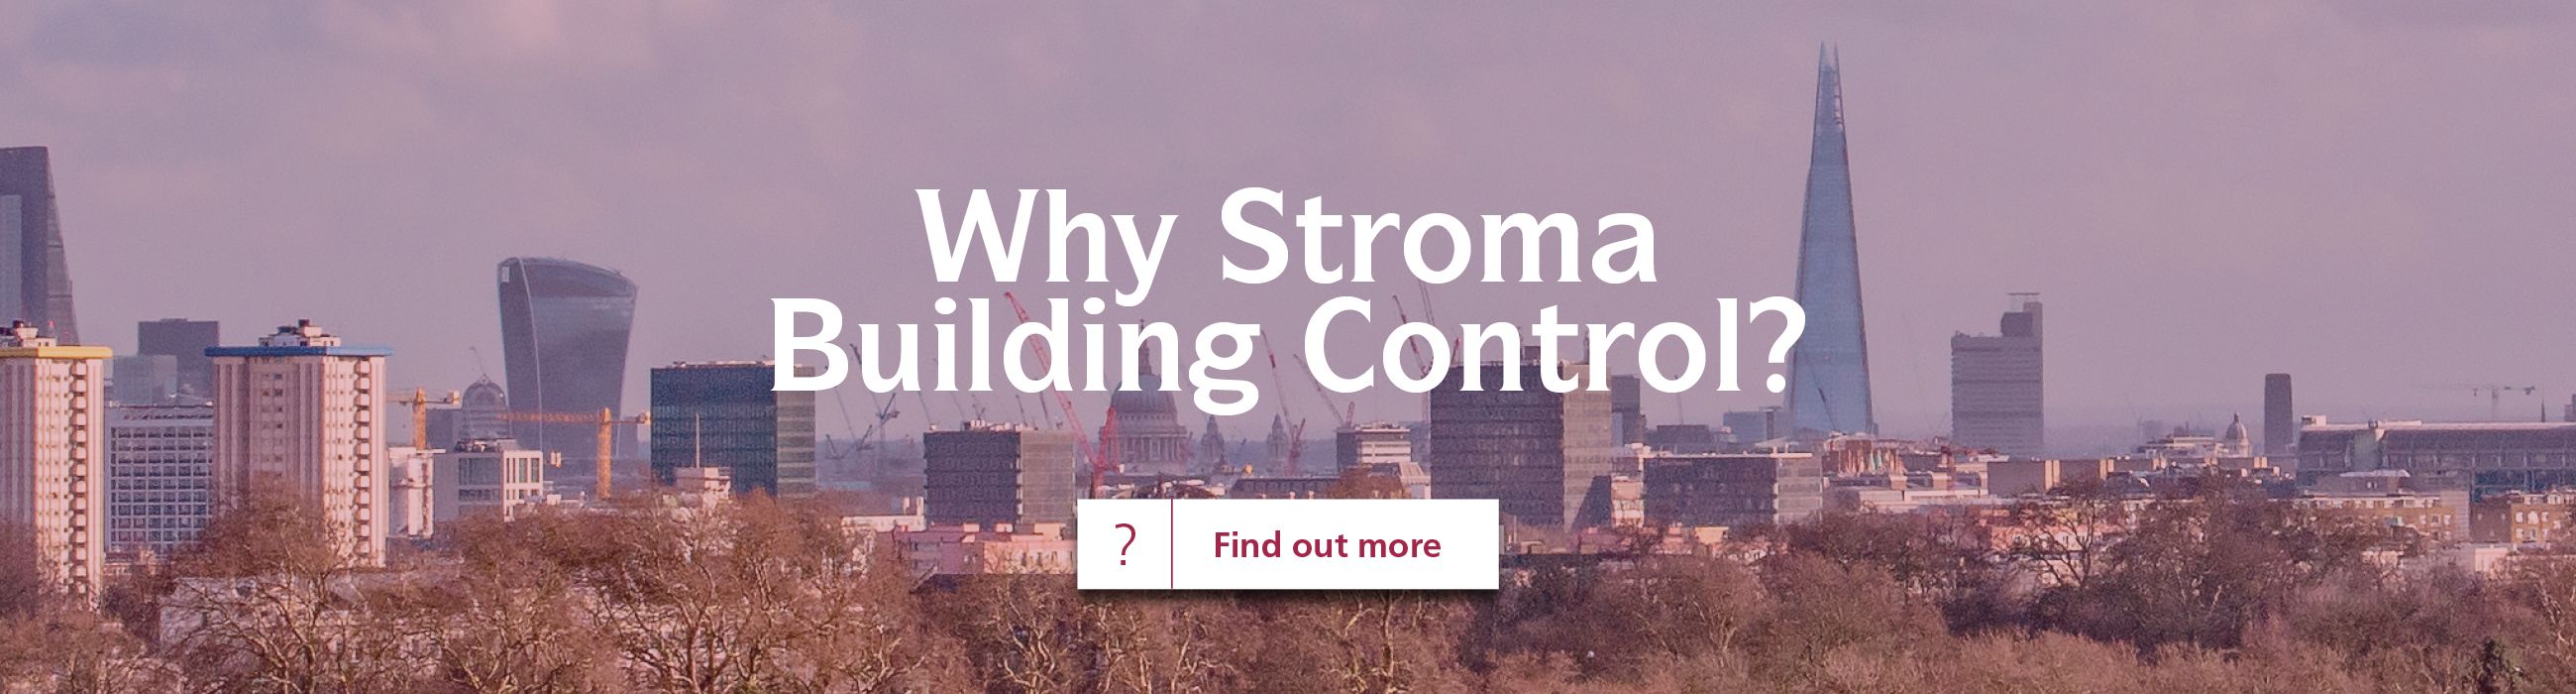 Why Stroma Building Control